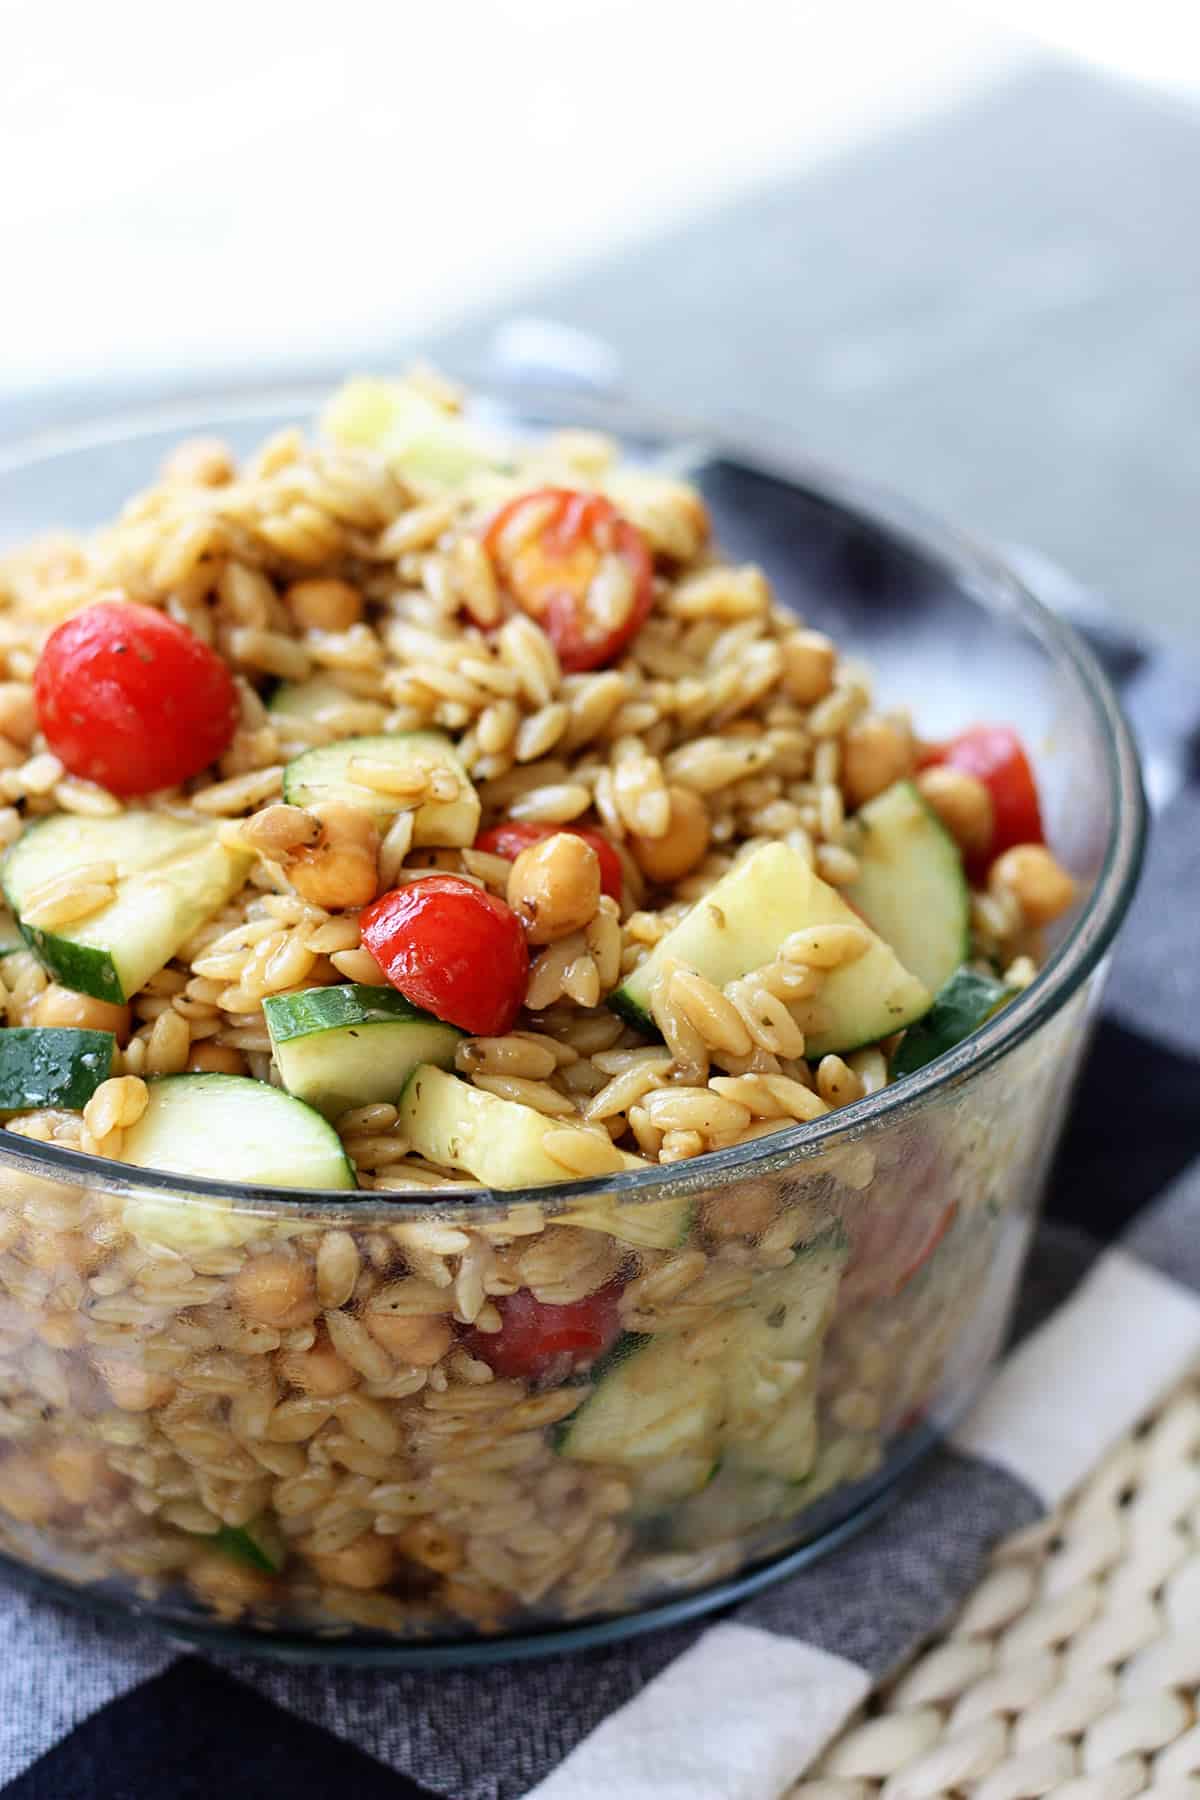 A glass bowl filled with orzo pasta salad.